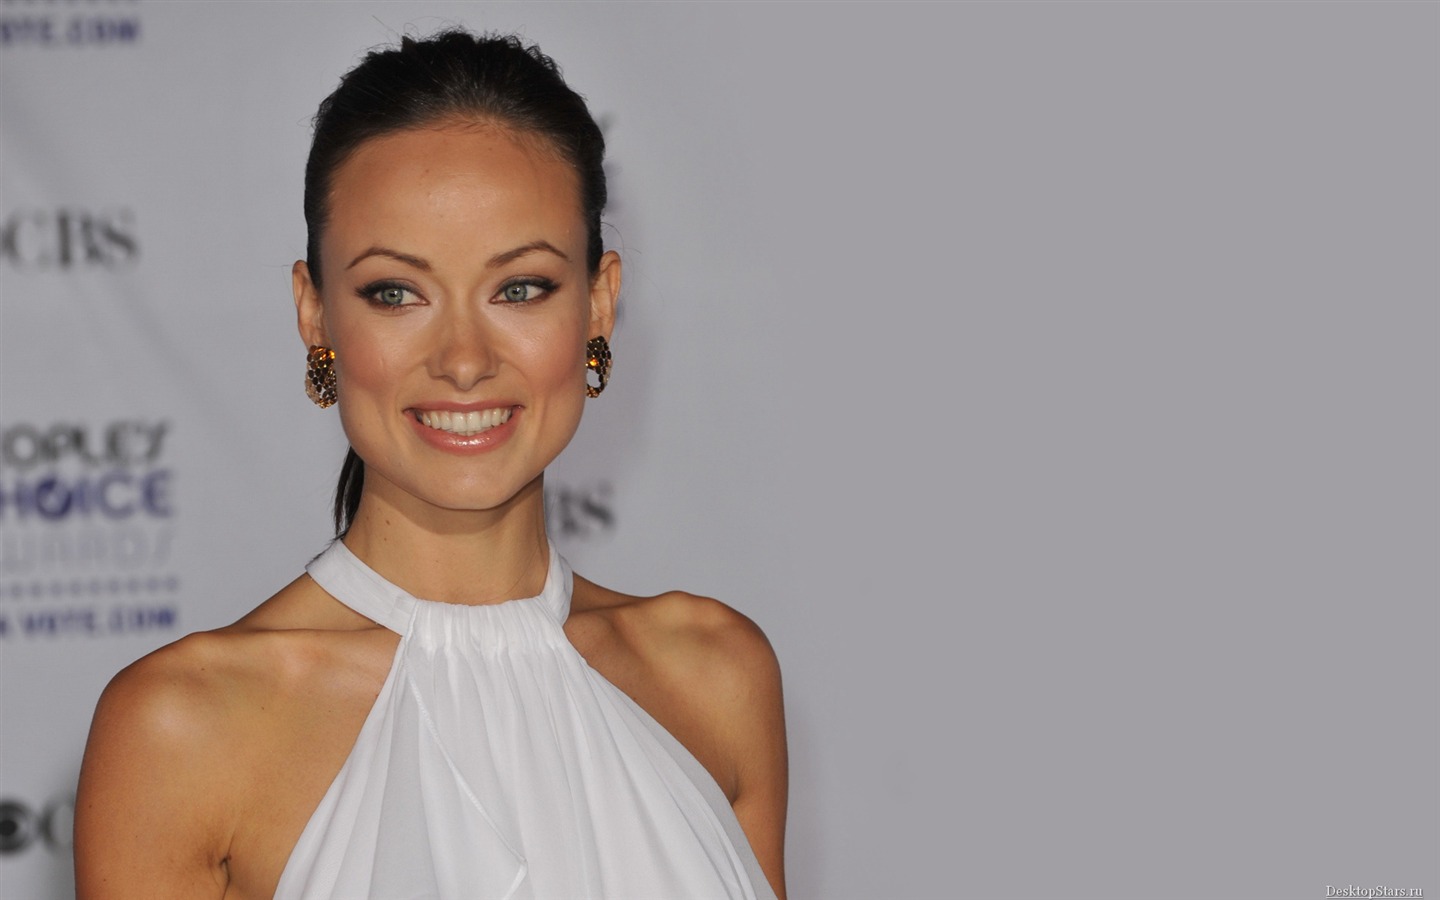 Olivia Wilde #037 - 1440x900 Wallpapers Pictures Photos Images